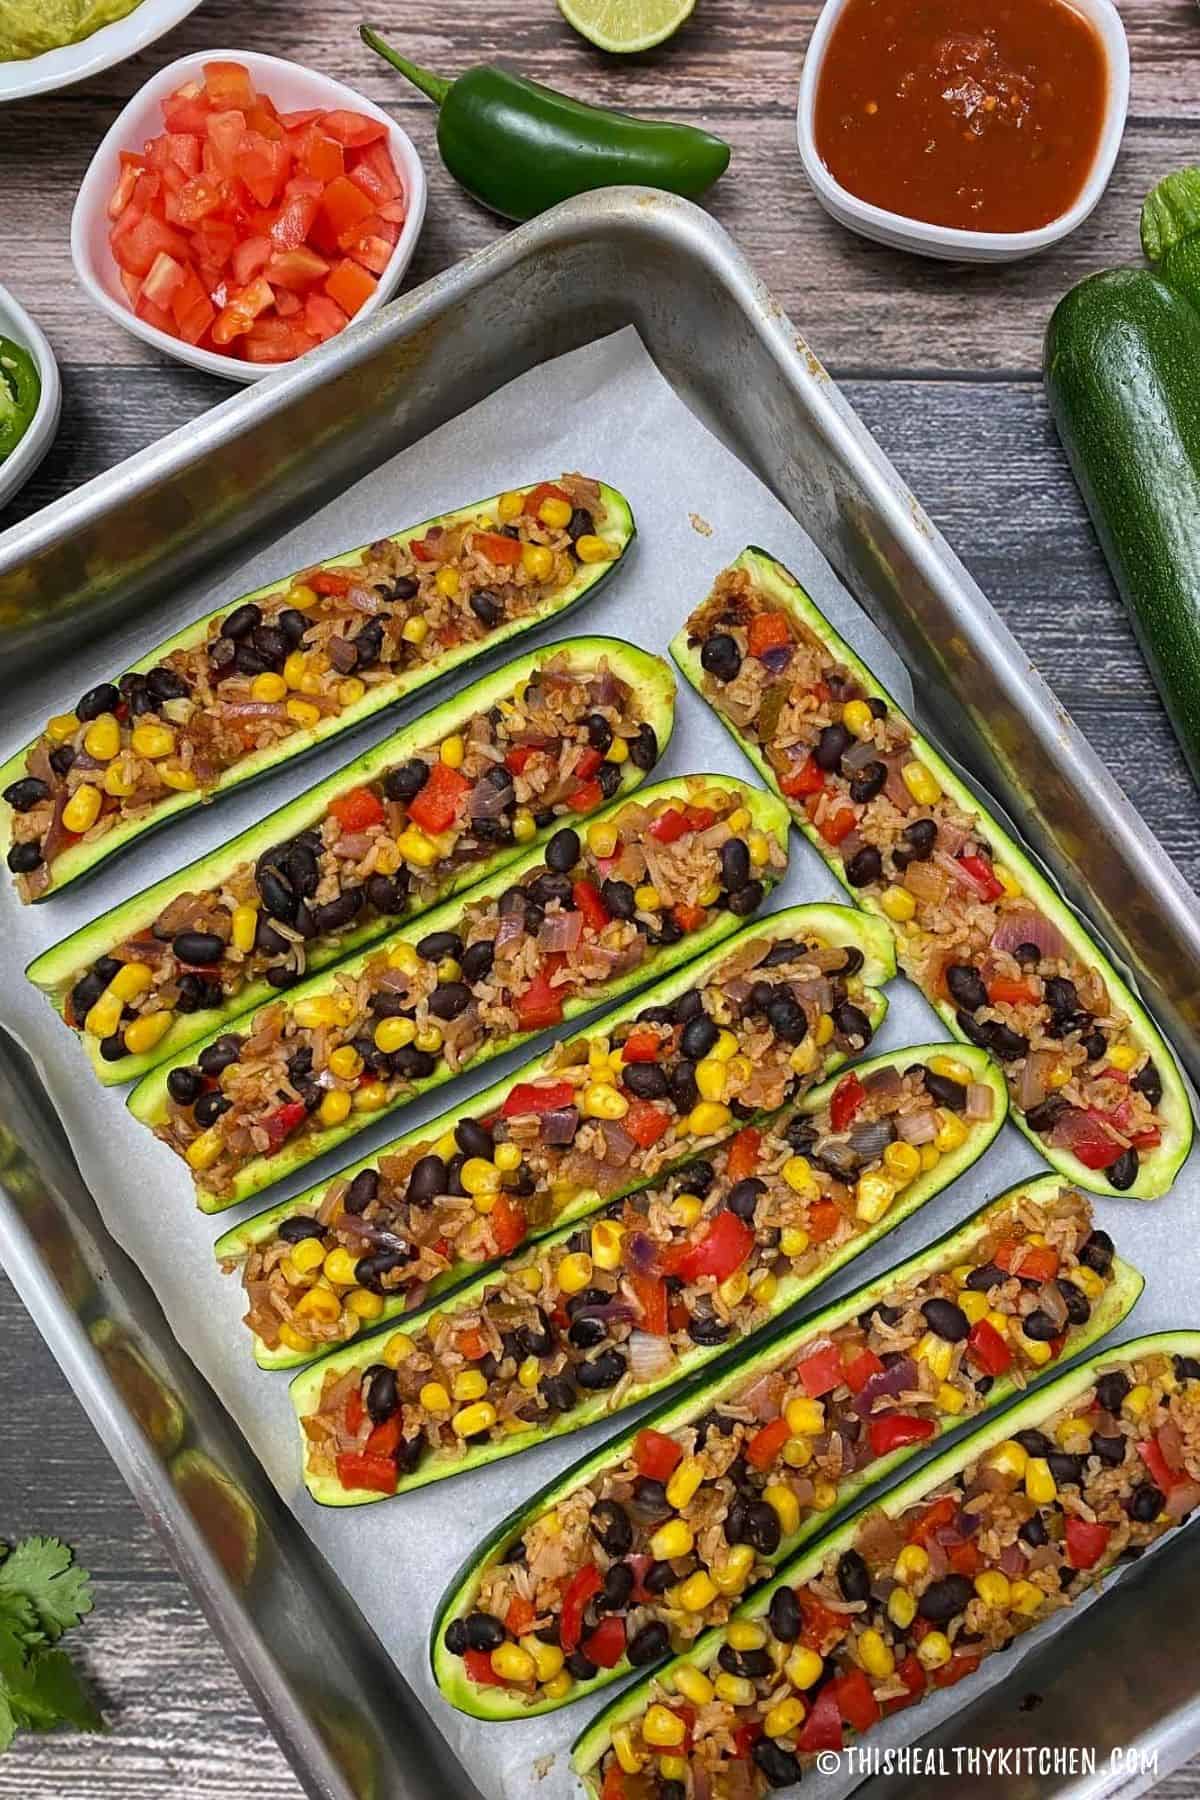 Zucchini boats in large baking tray with beans, rice, peppers and corn inside.